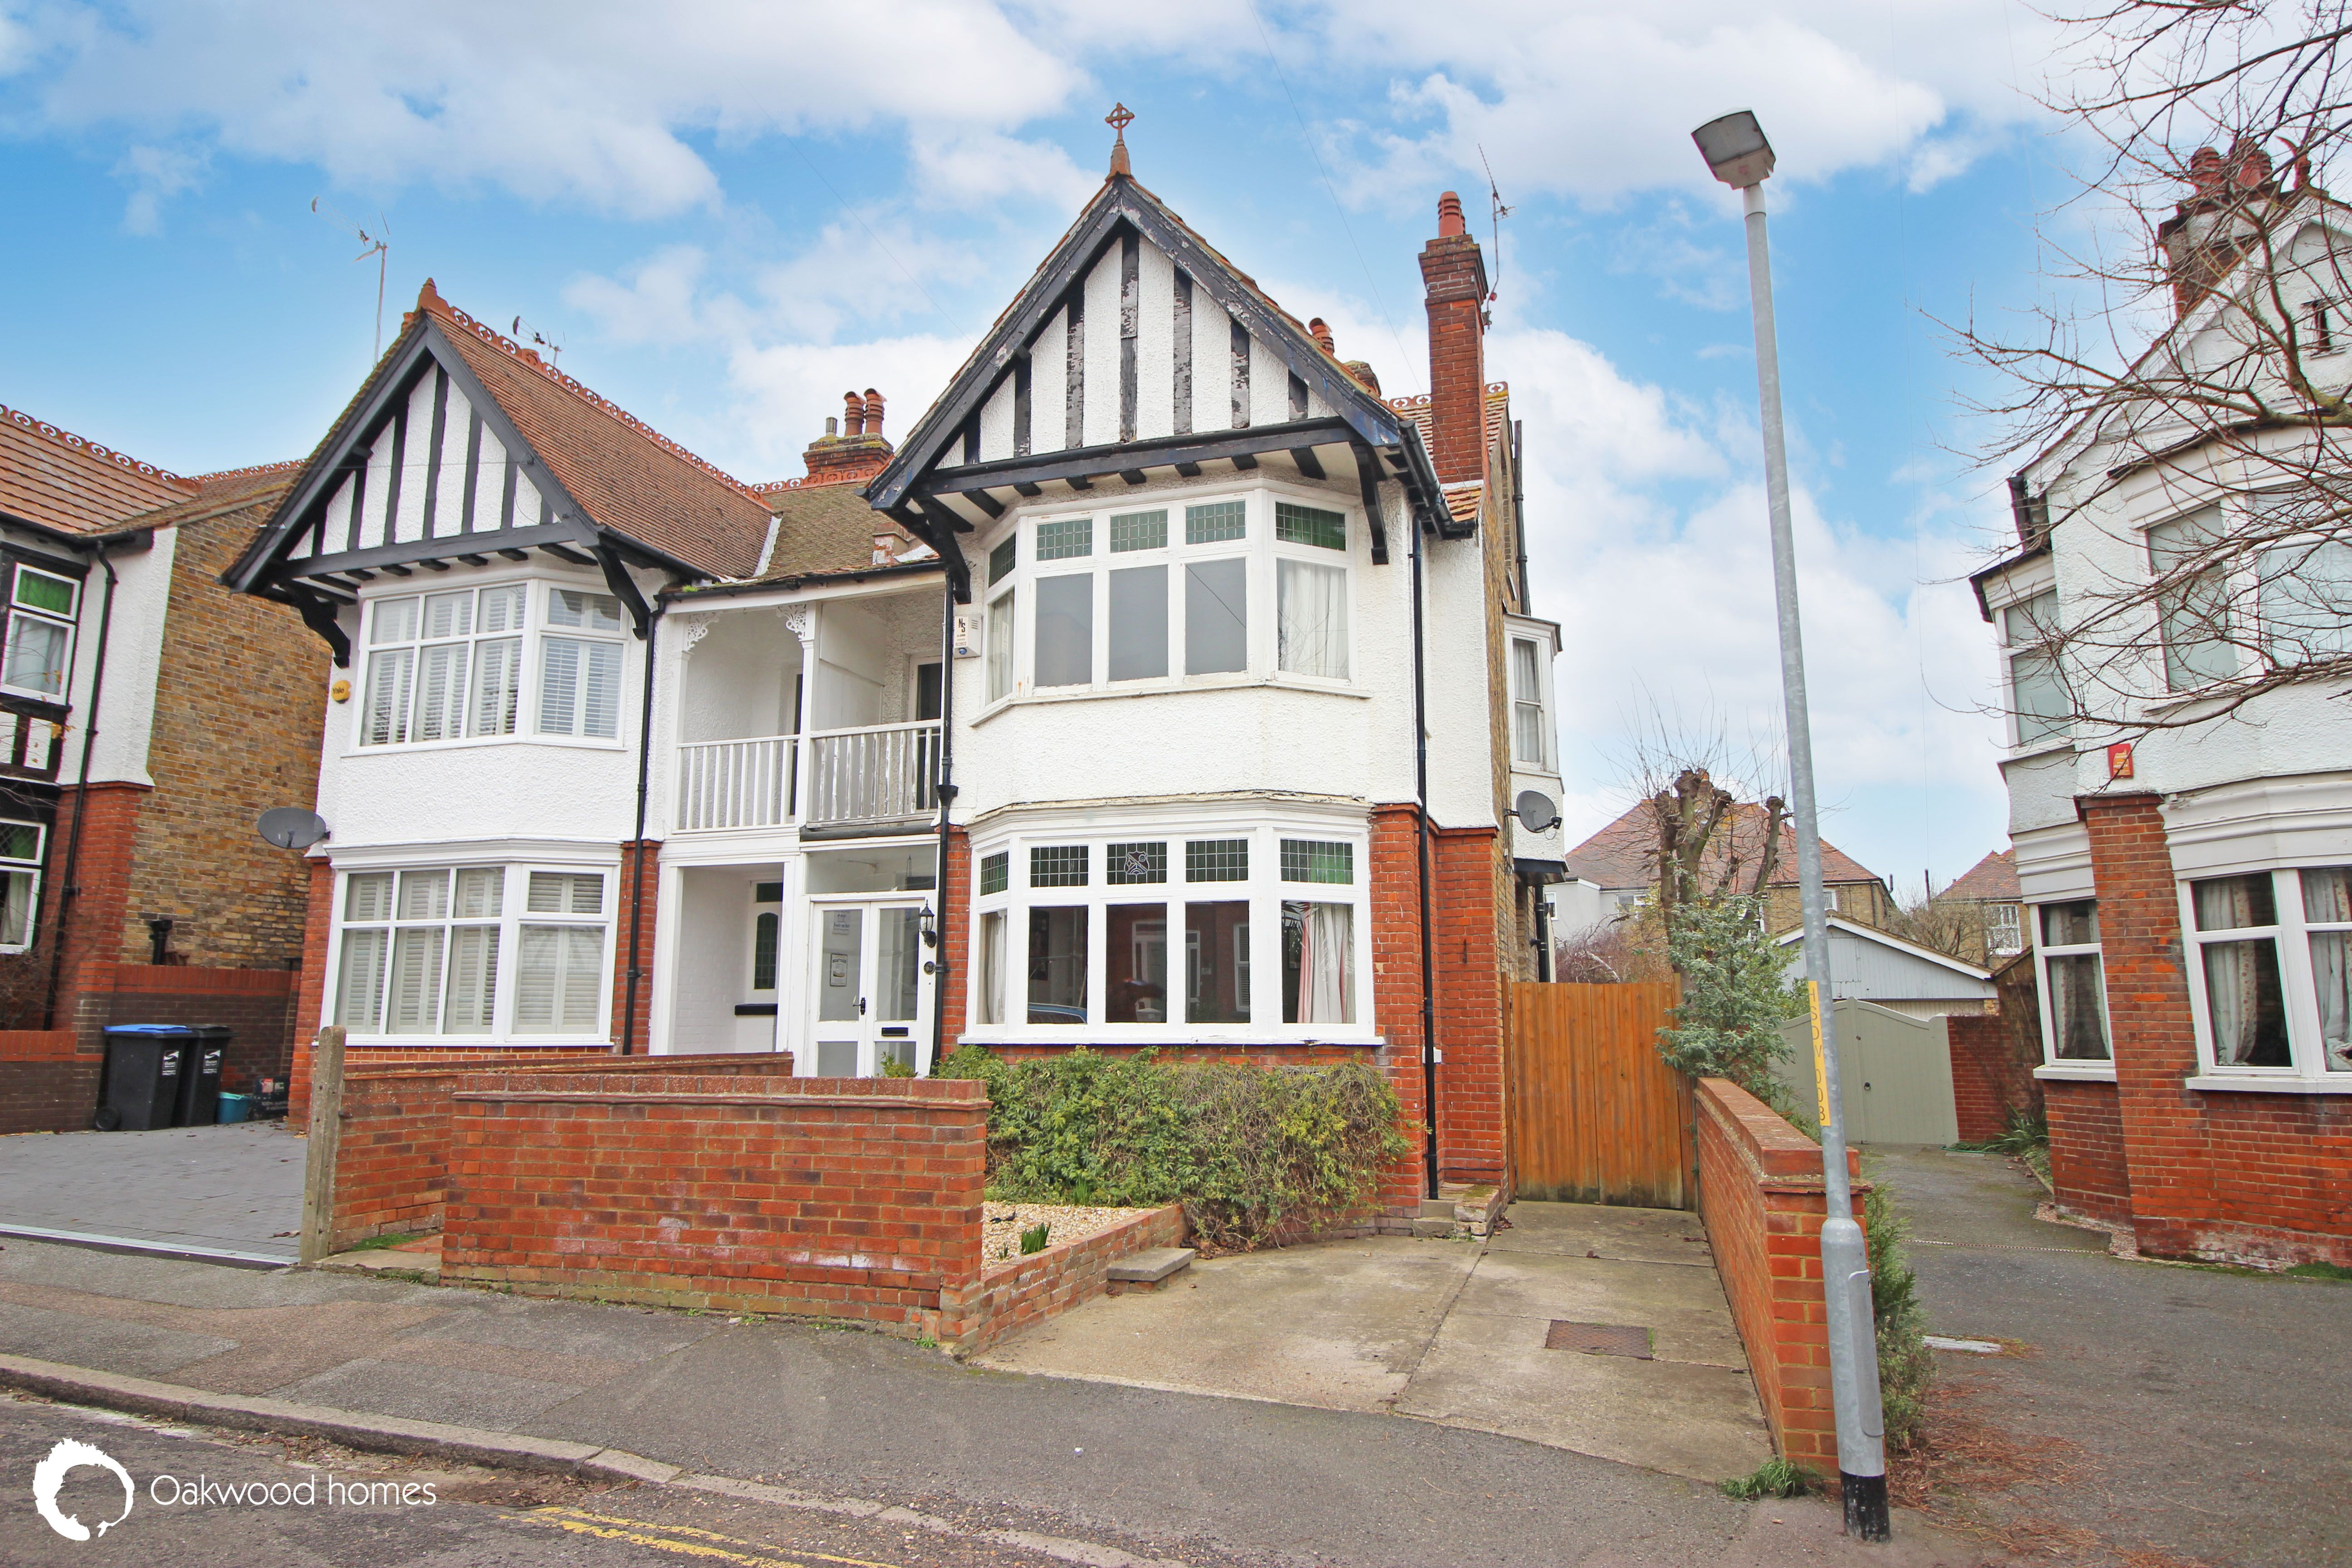 4 bed semi-detached house for sale in St Georges Road, Broadstairs - Property Image 1